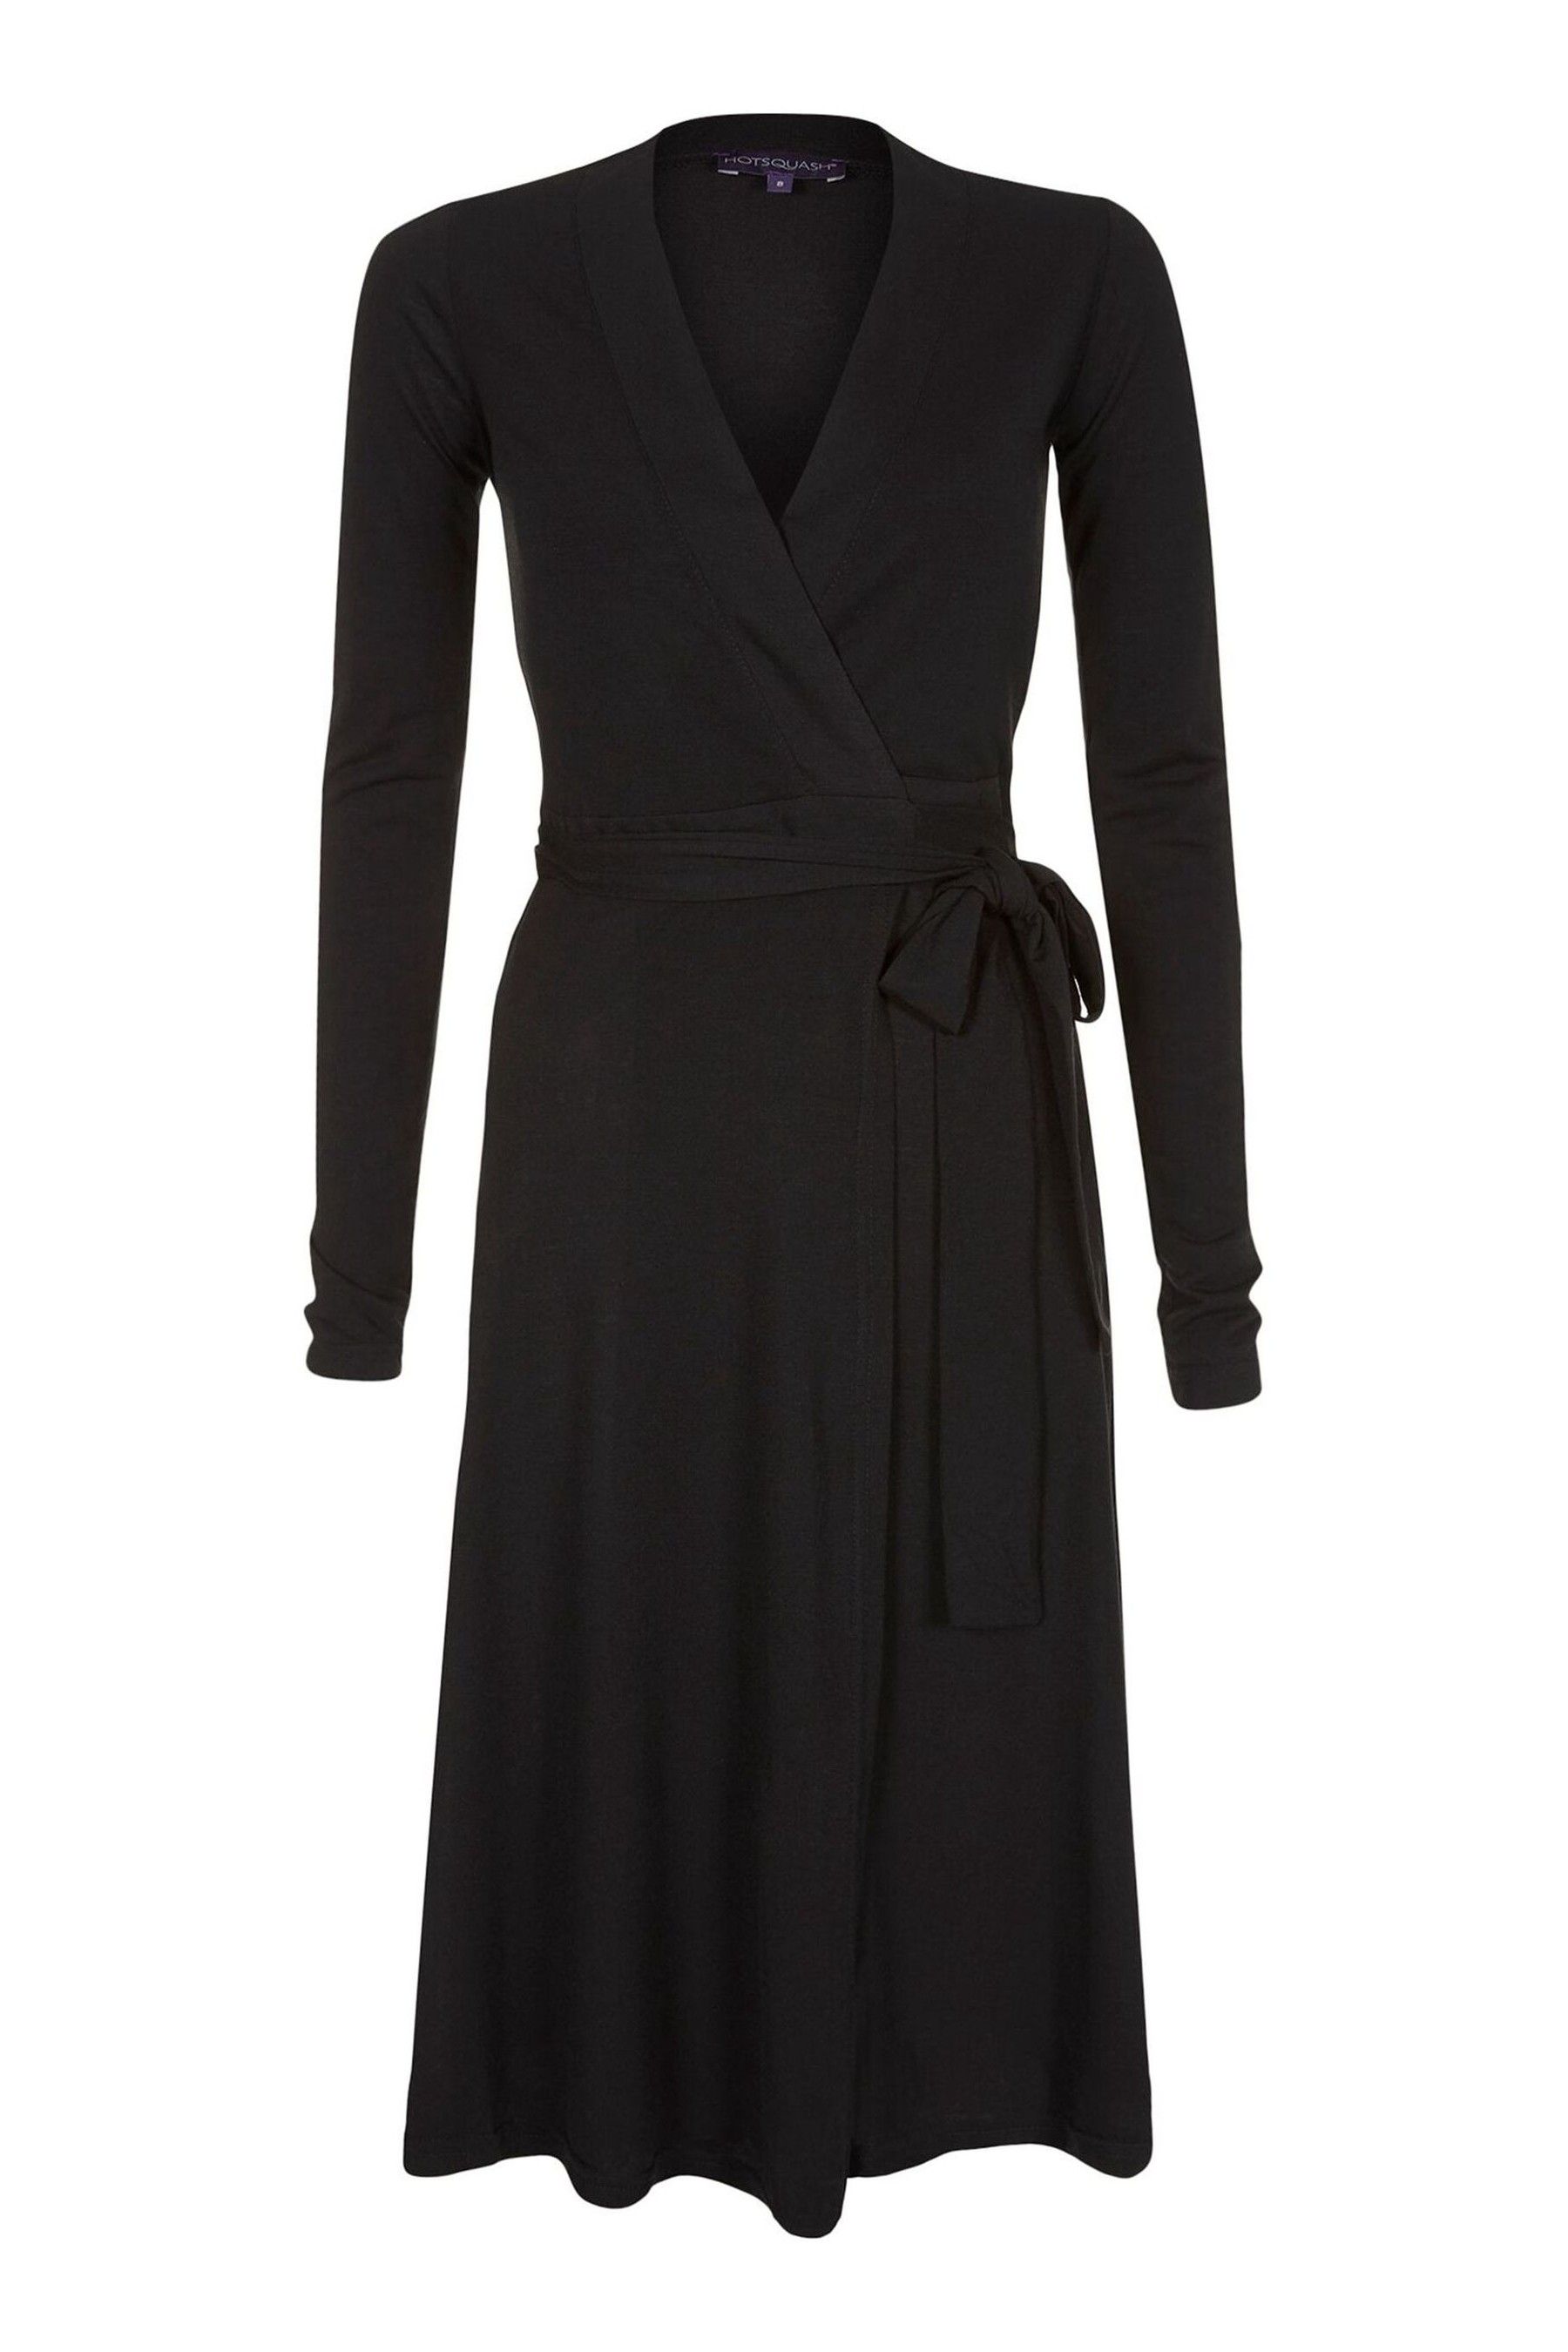 Buy HotSquash Black The Wrap Dress from the Next UK online shop